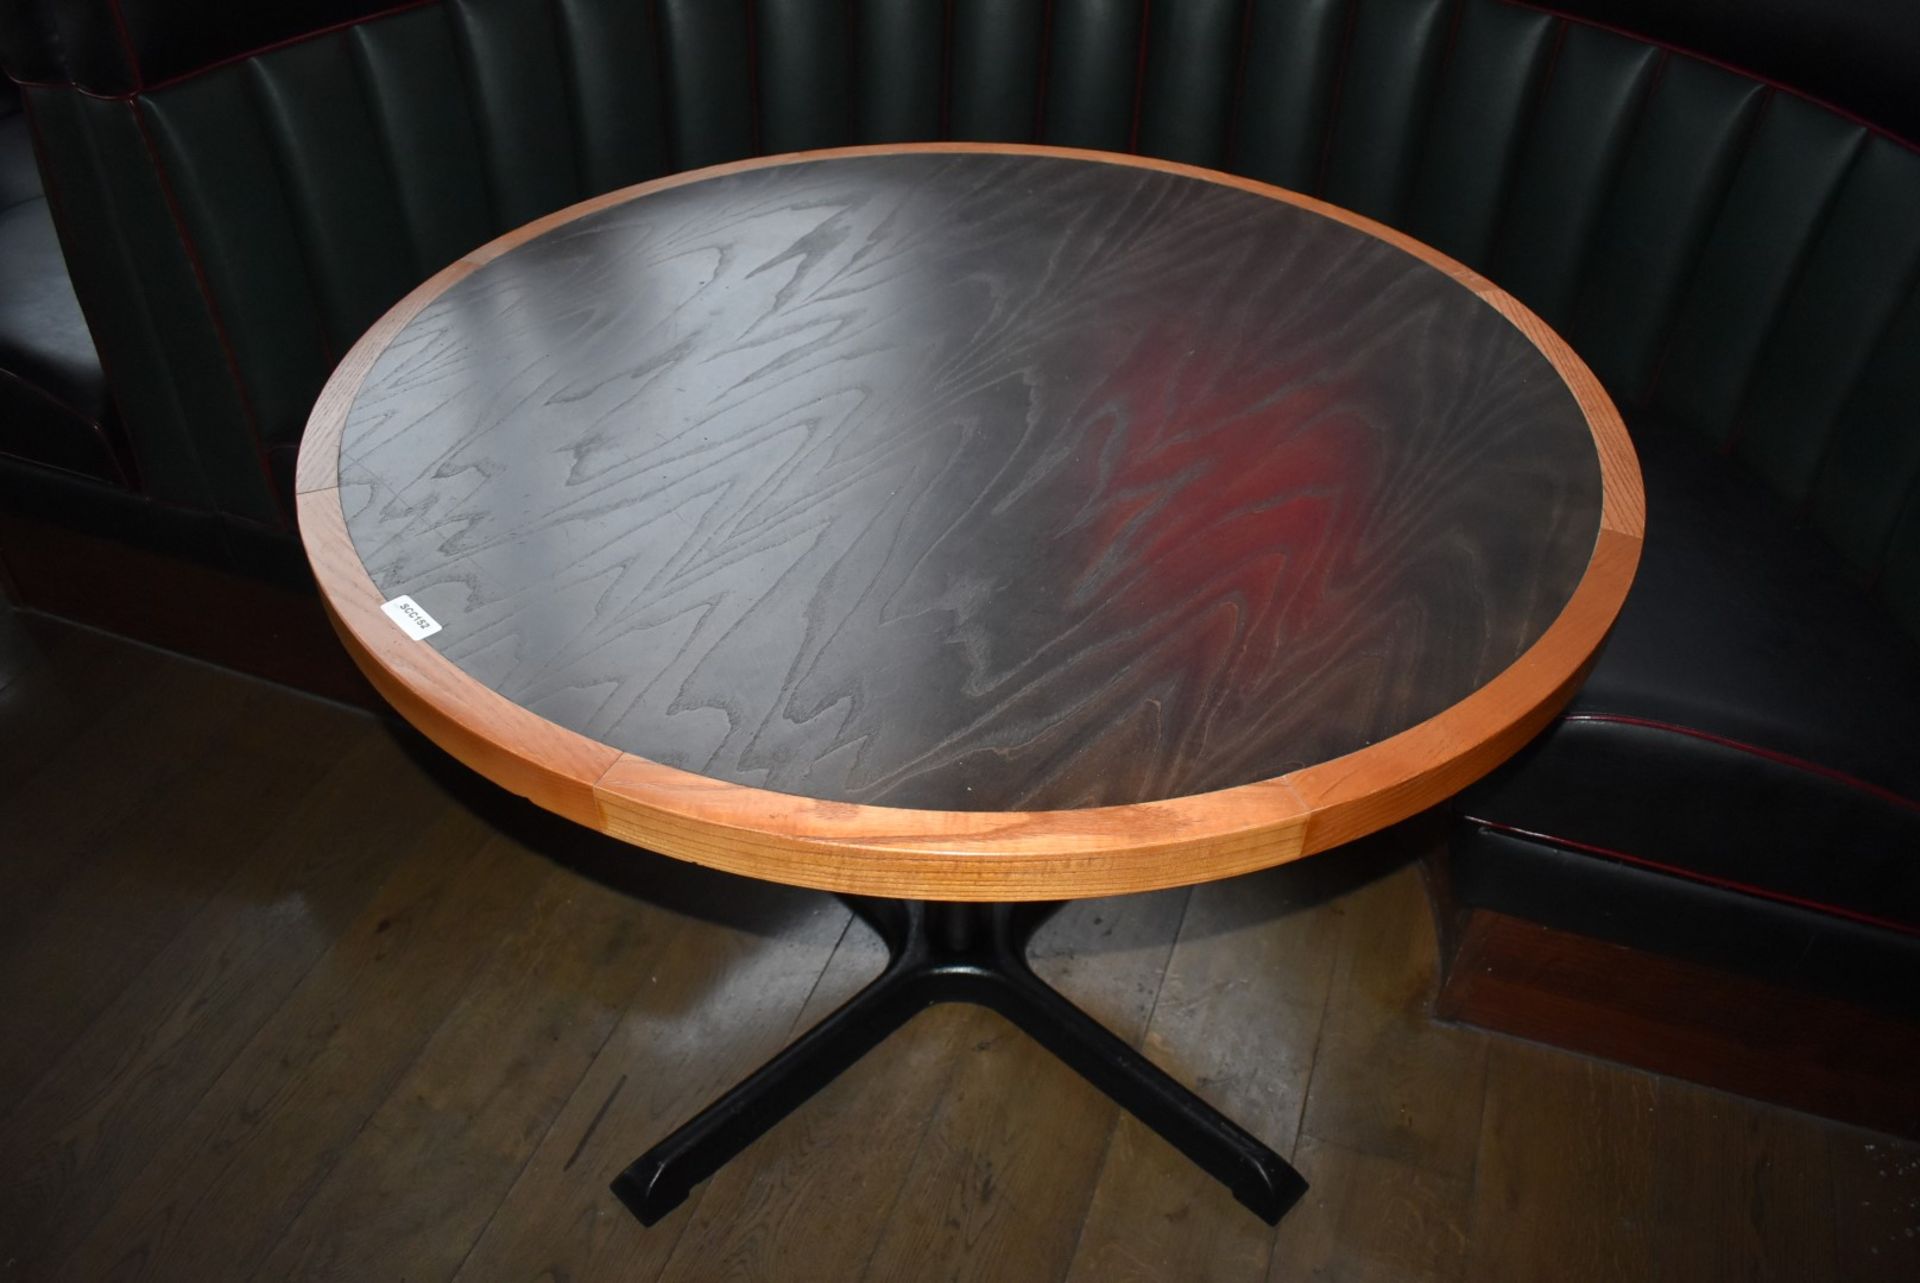 1 x Round Restaurant Table With a 105cm Diameter - Features a Two Tone Wooden Top and Cast Iron Base - Image 2 of 4